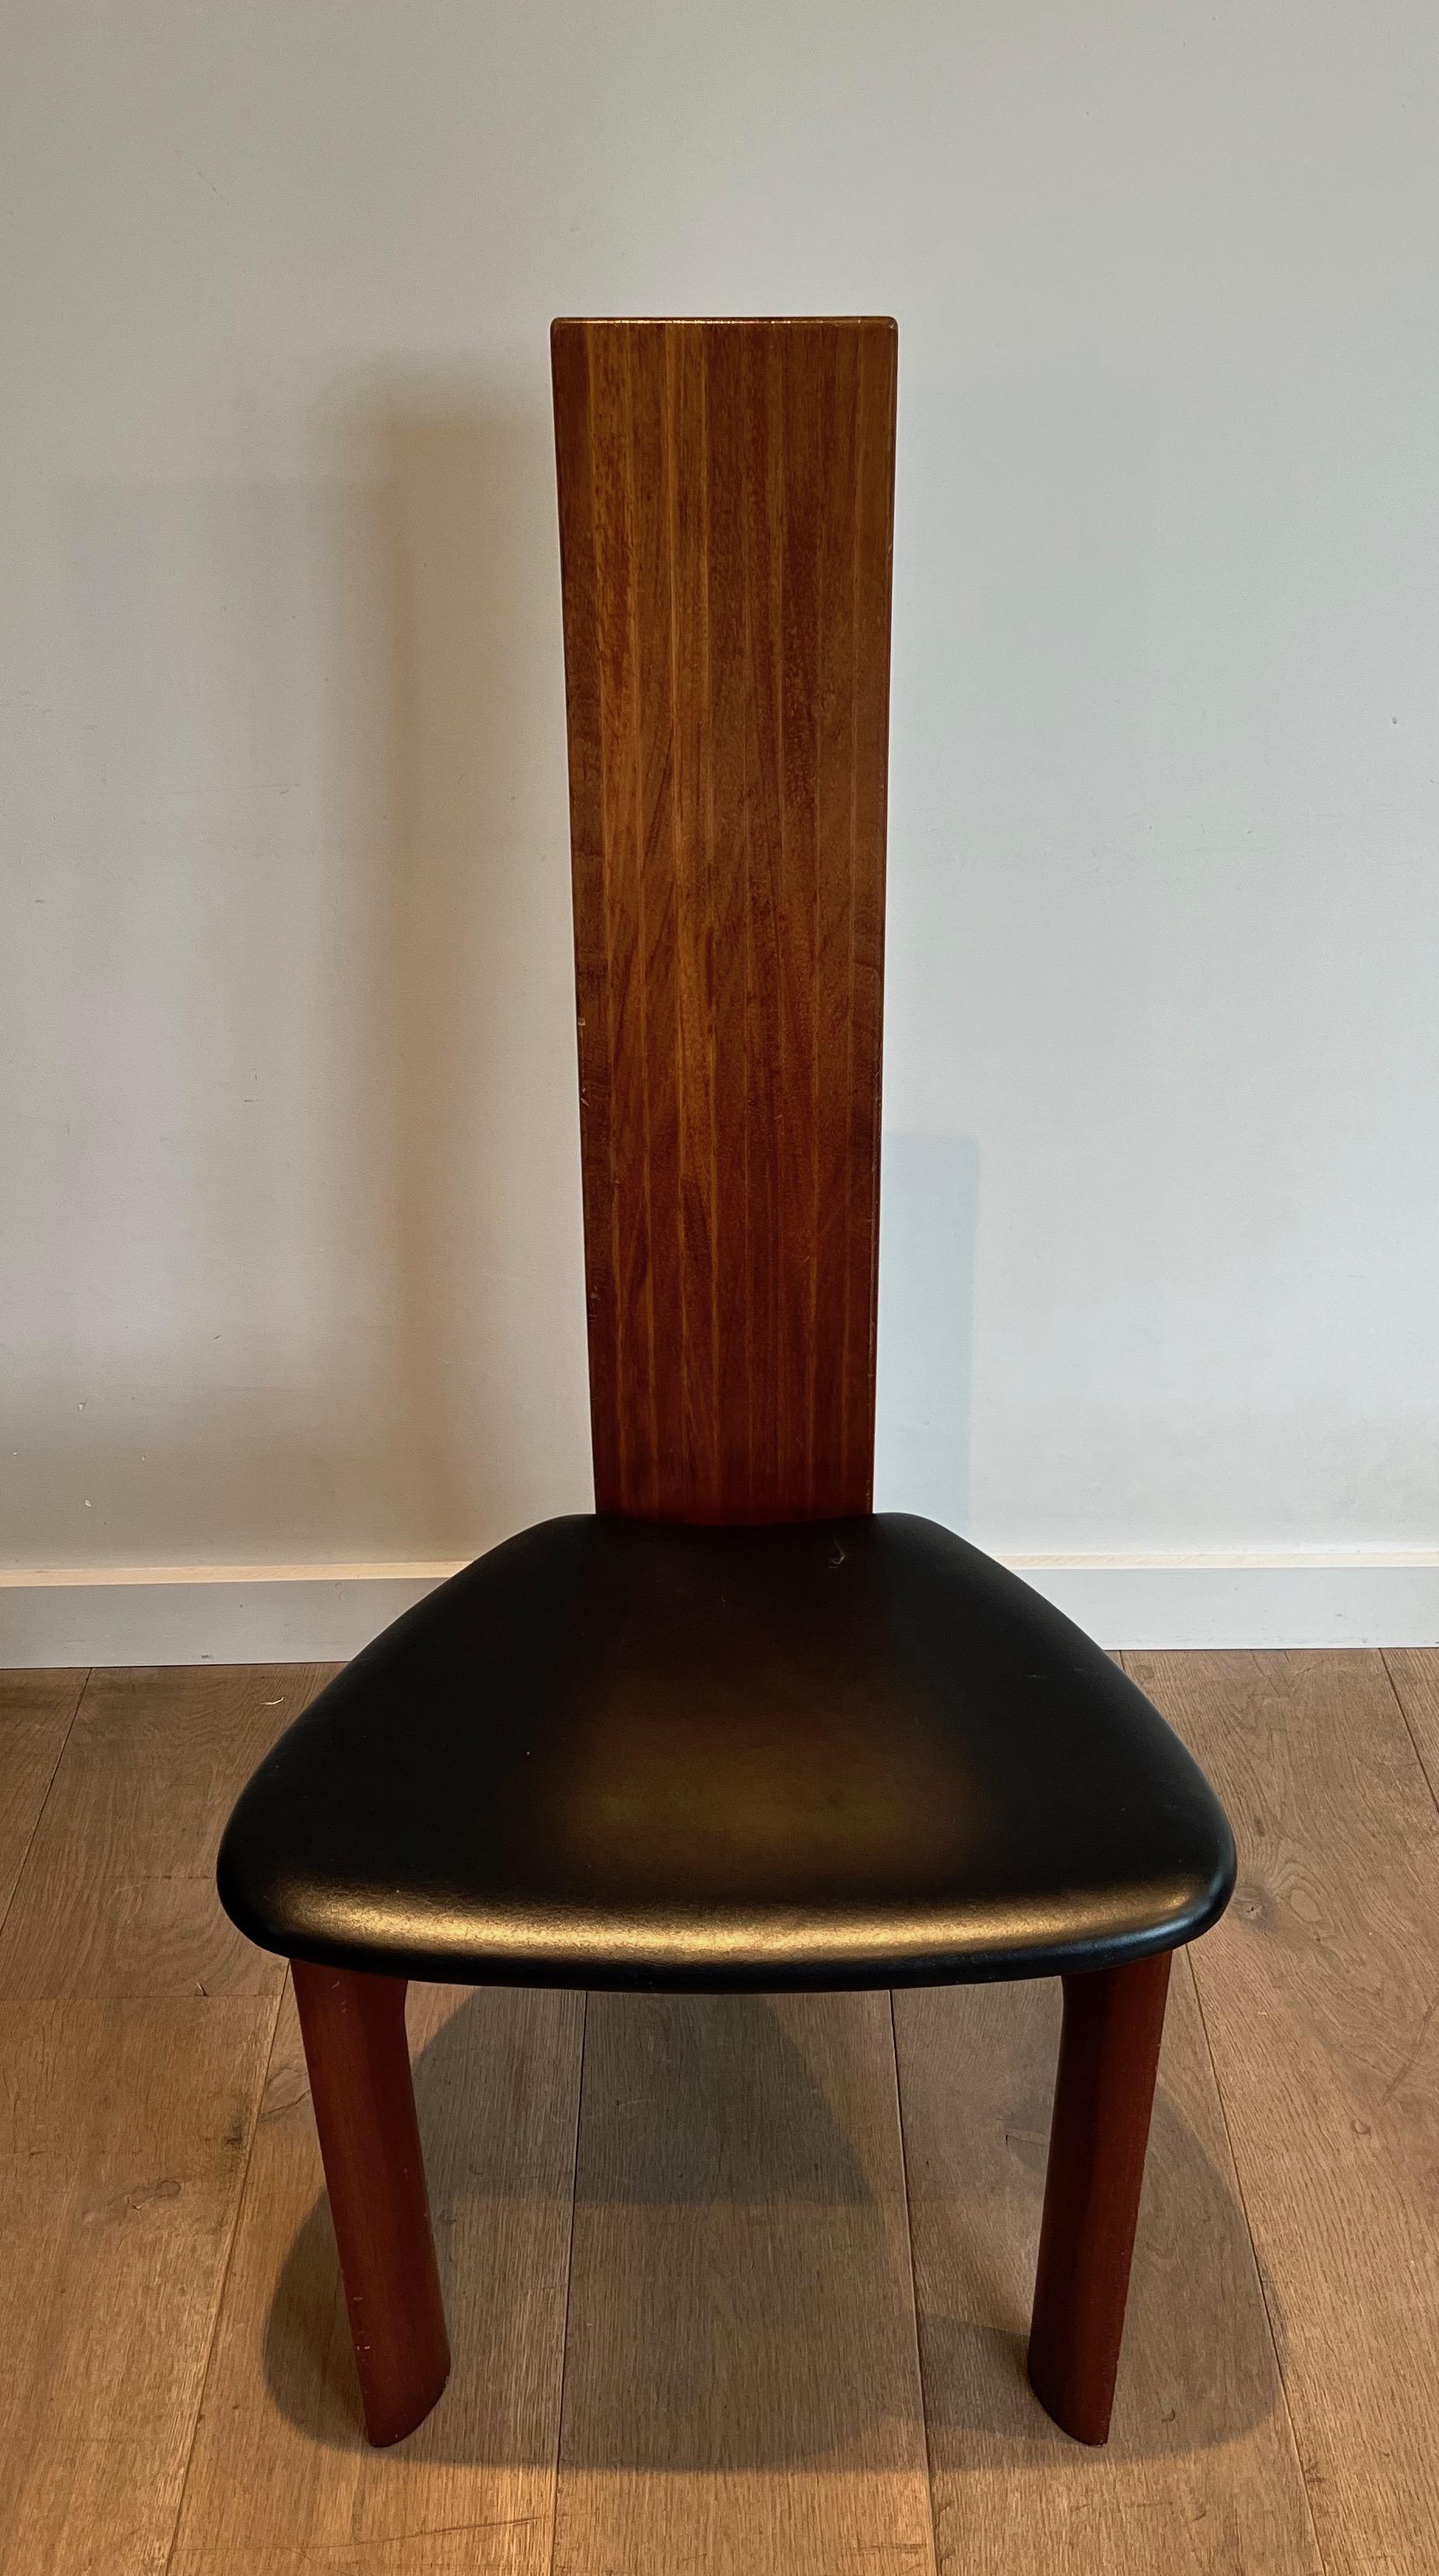 Pair of Exotic Wood and Black Leather Chairs, Scandinavian Work. Circa 1970 For Sale 6